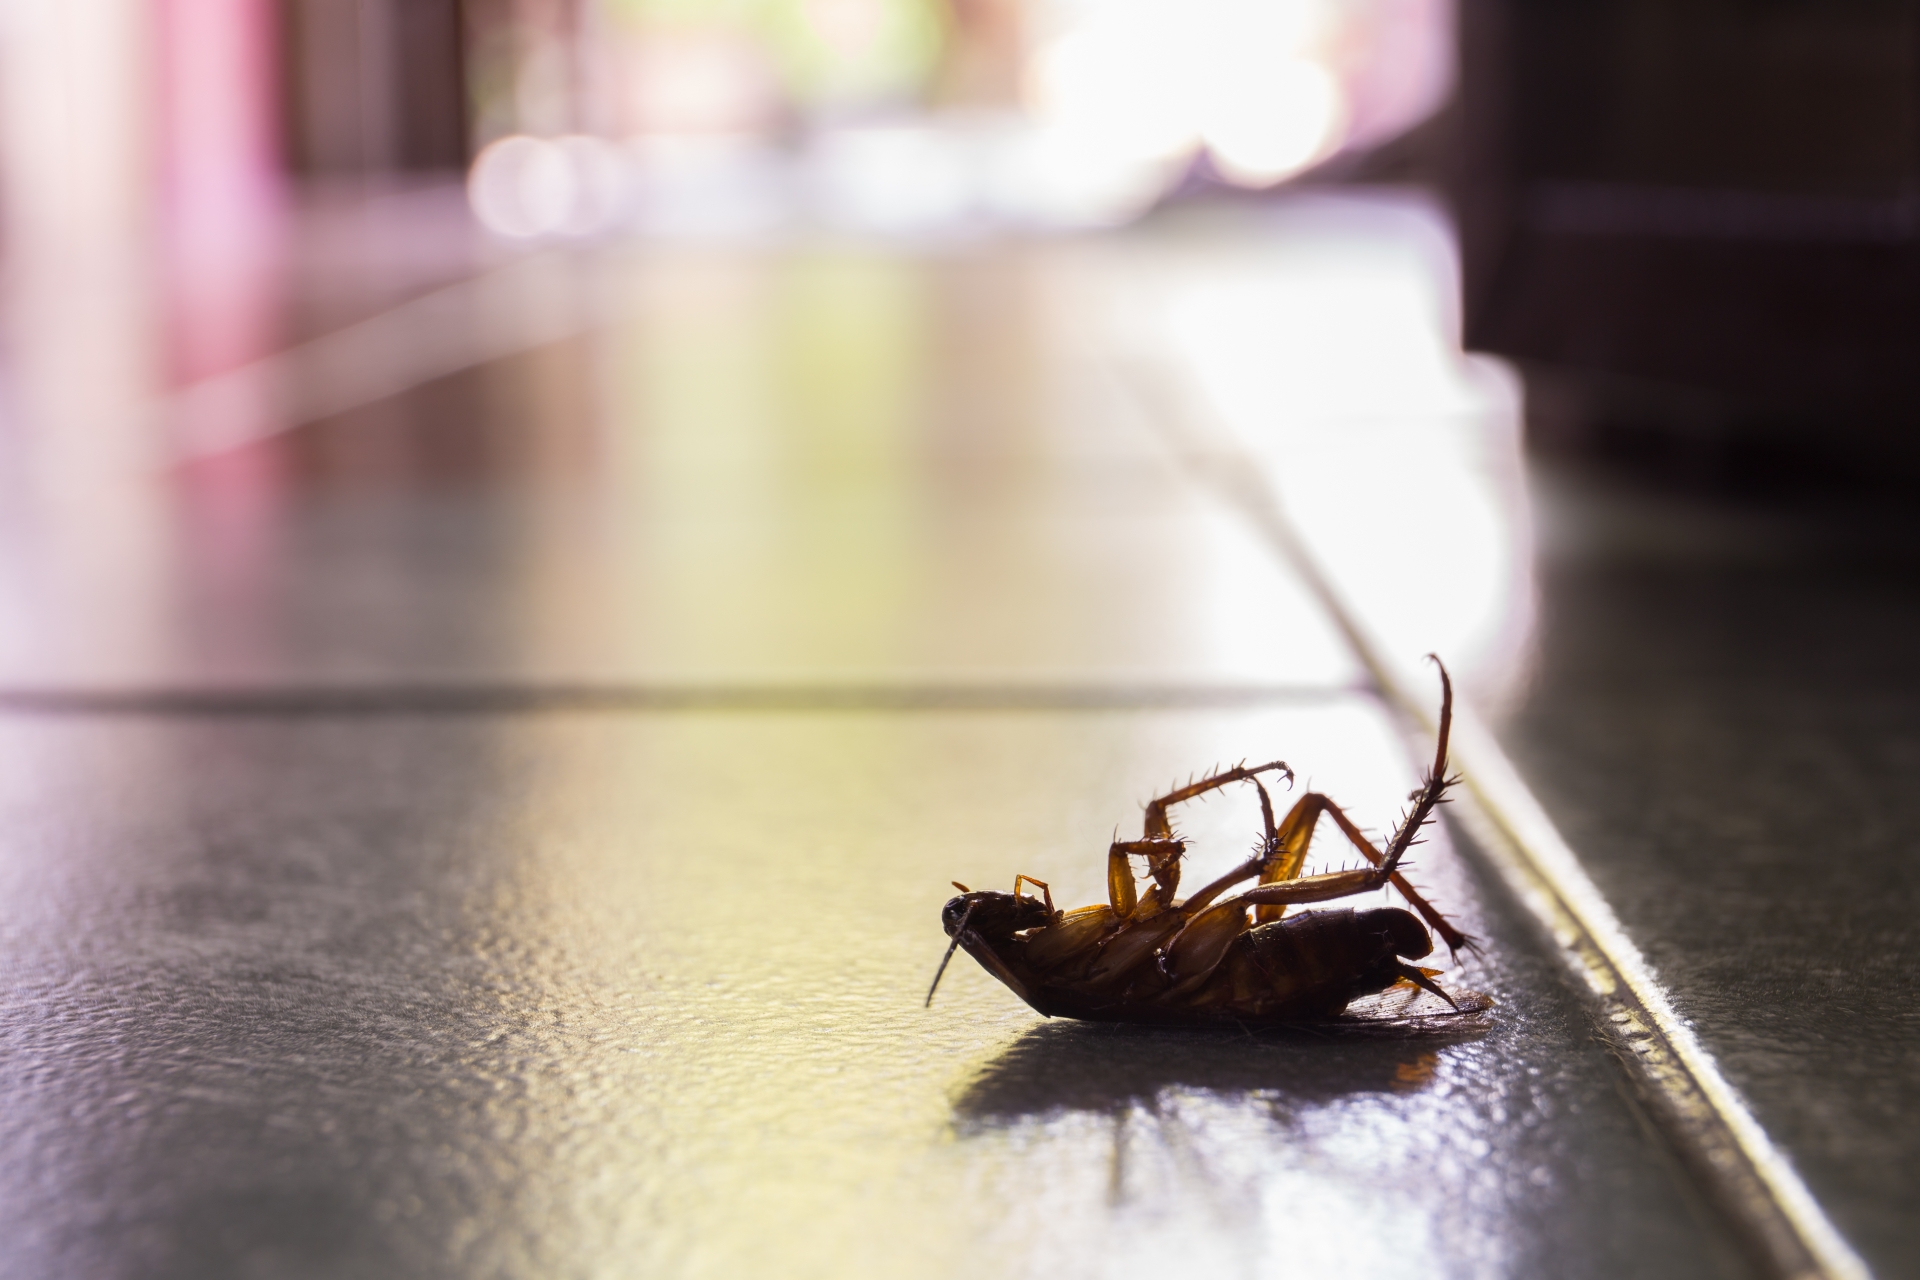 Cockroach Control, Pest Control in Tadworth, Kingswood, Mogador, KT20. Call Now 020 8166 9746